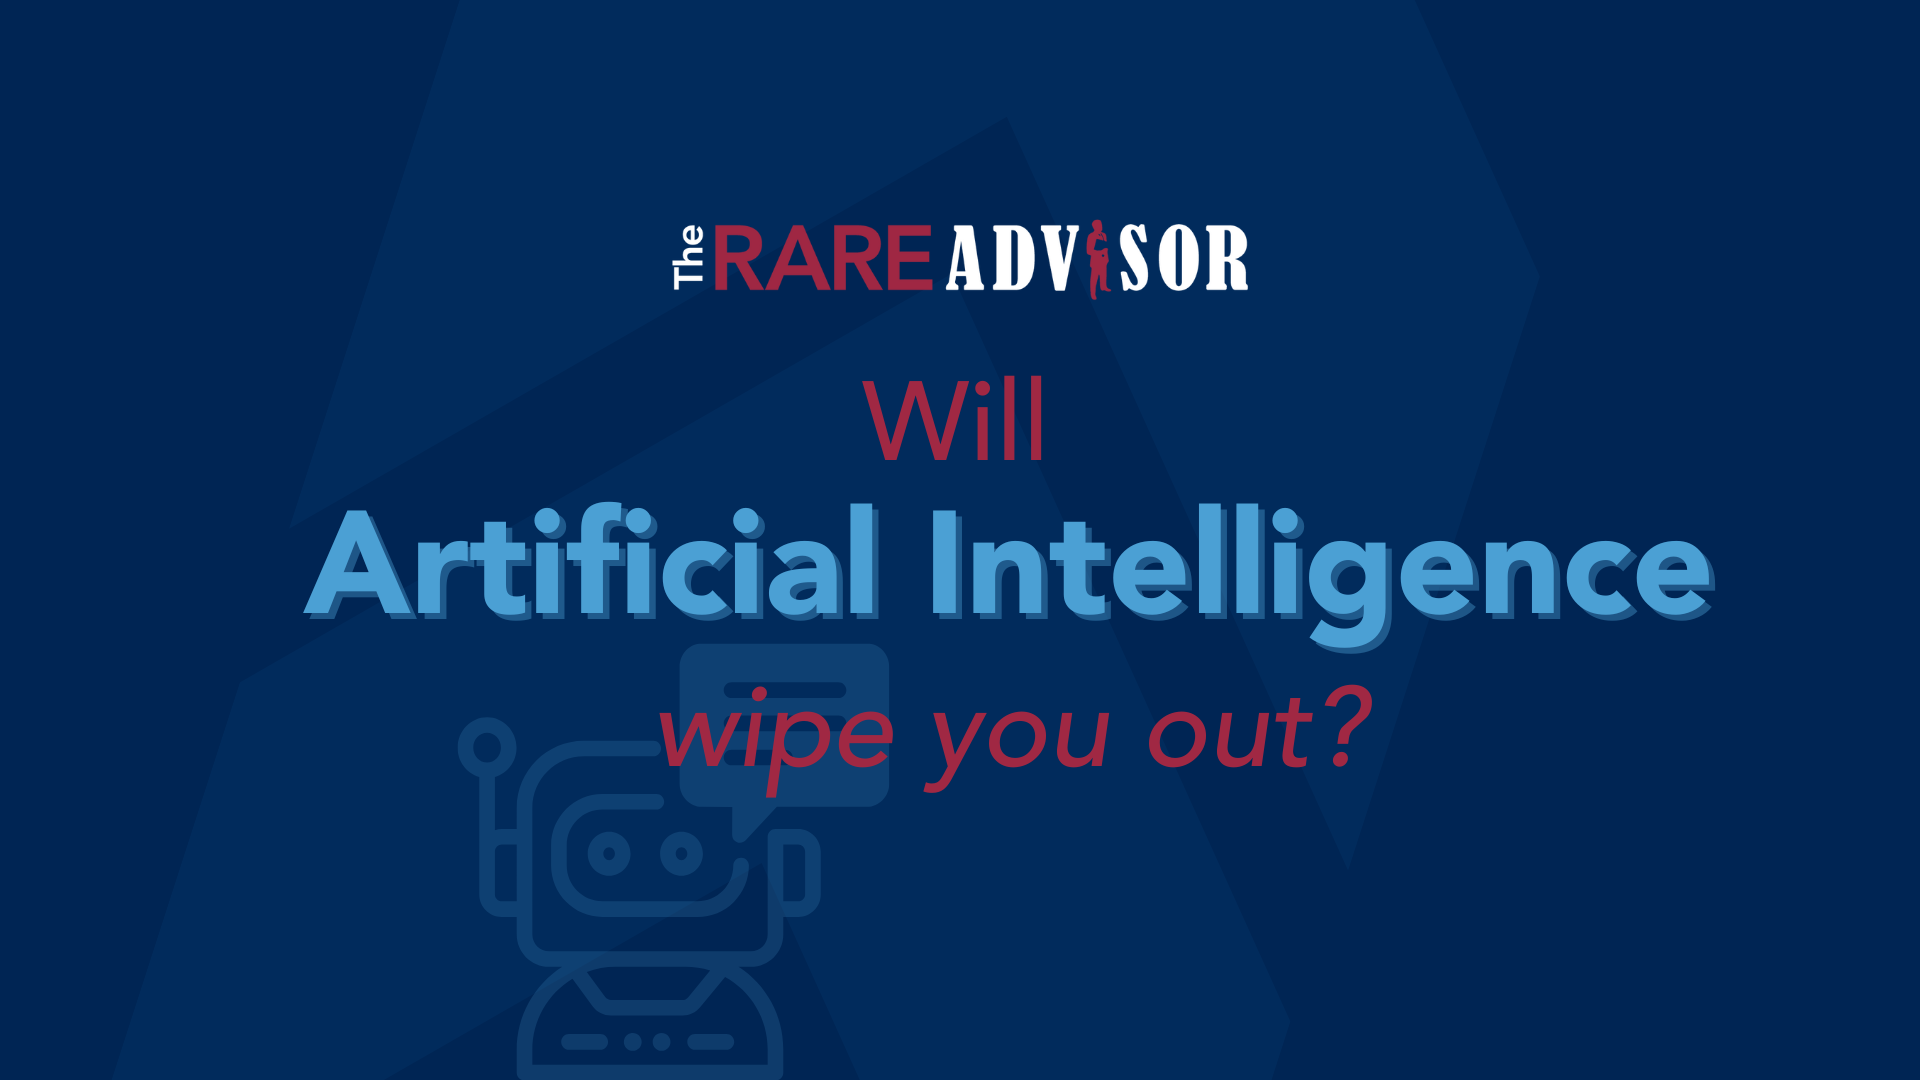 The RARE Advisor: Will Artificial Intelligence Wipe You Out?